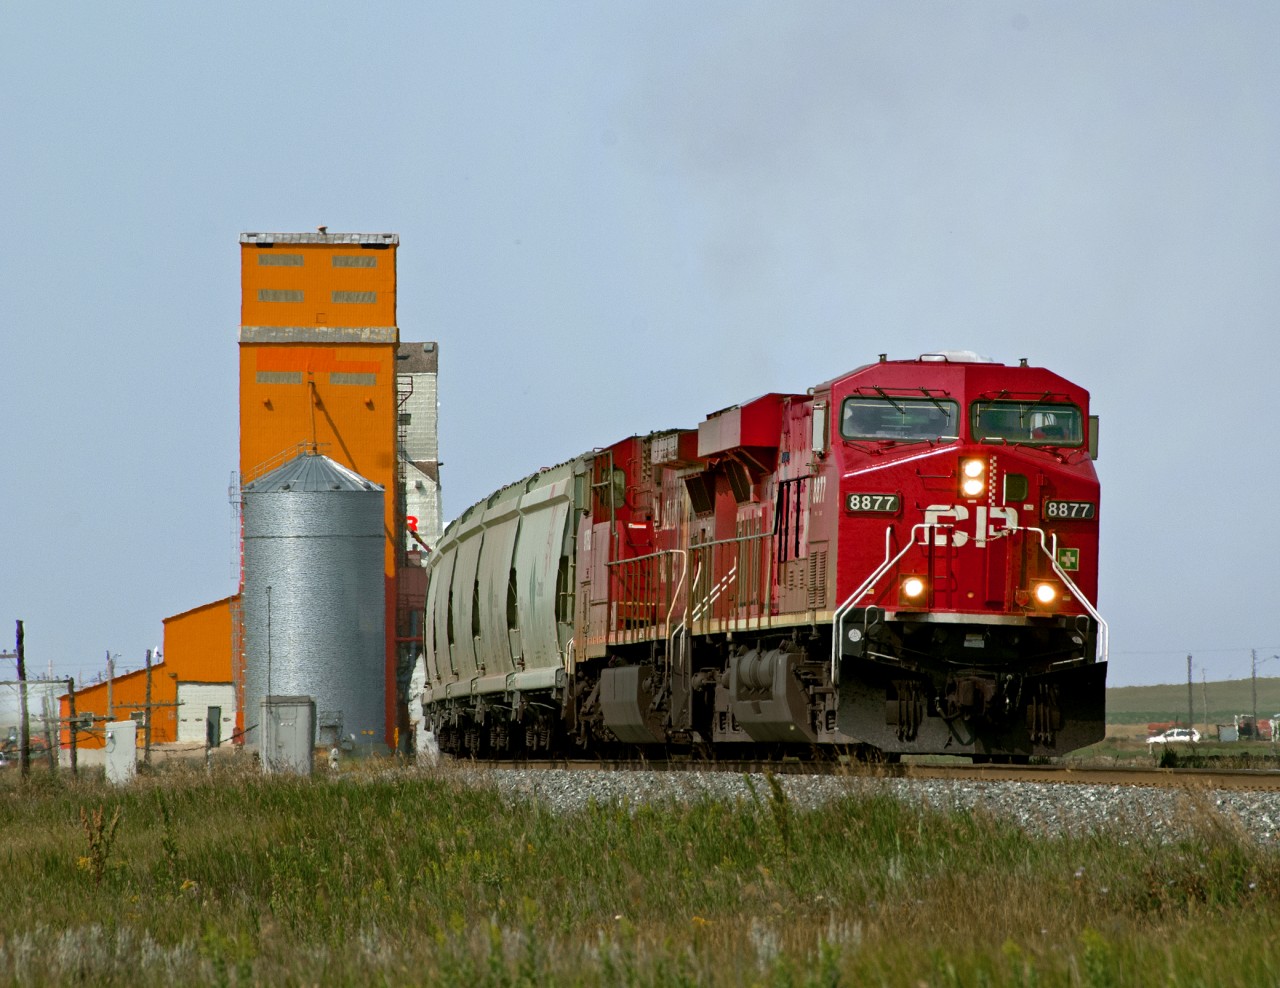 Potash Empties 672 pass the wooden grain elevators at Morse on the run between Swift Current and Moose Jaw